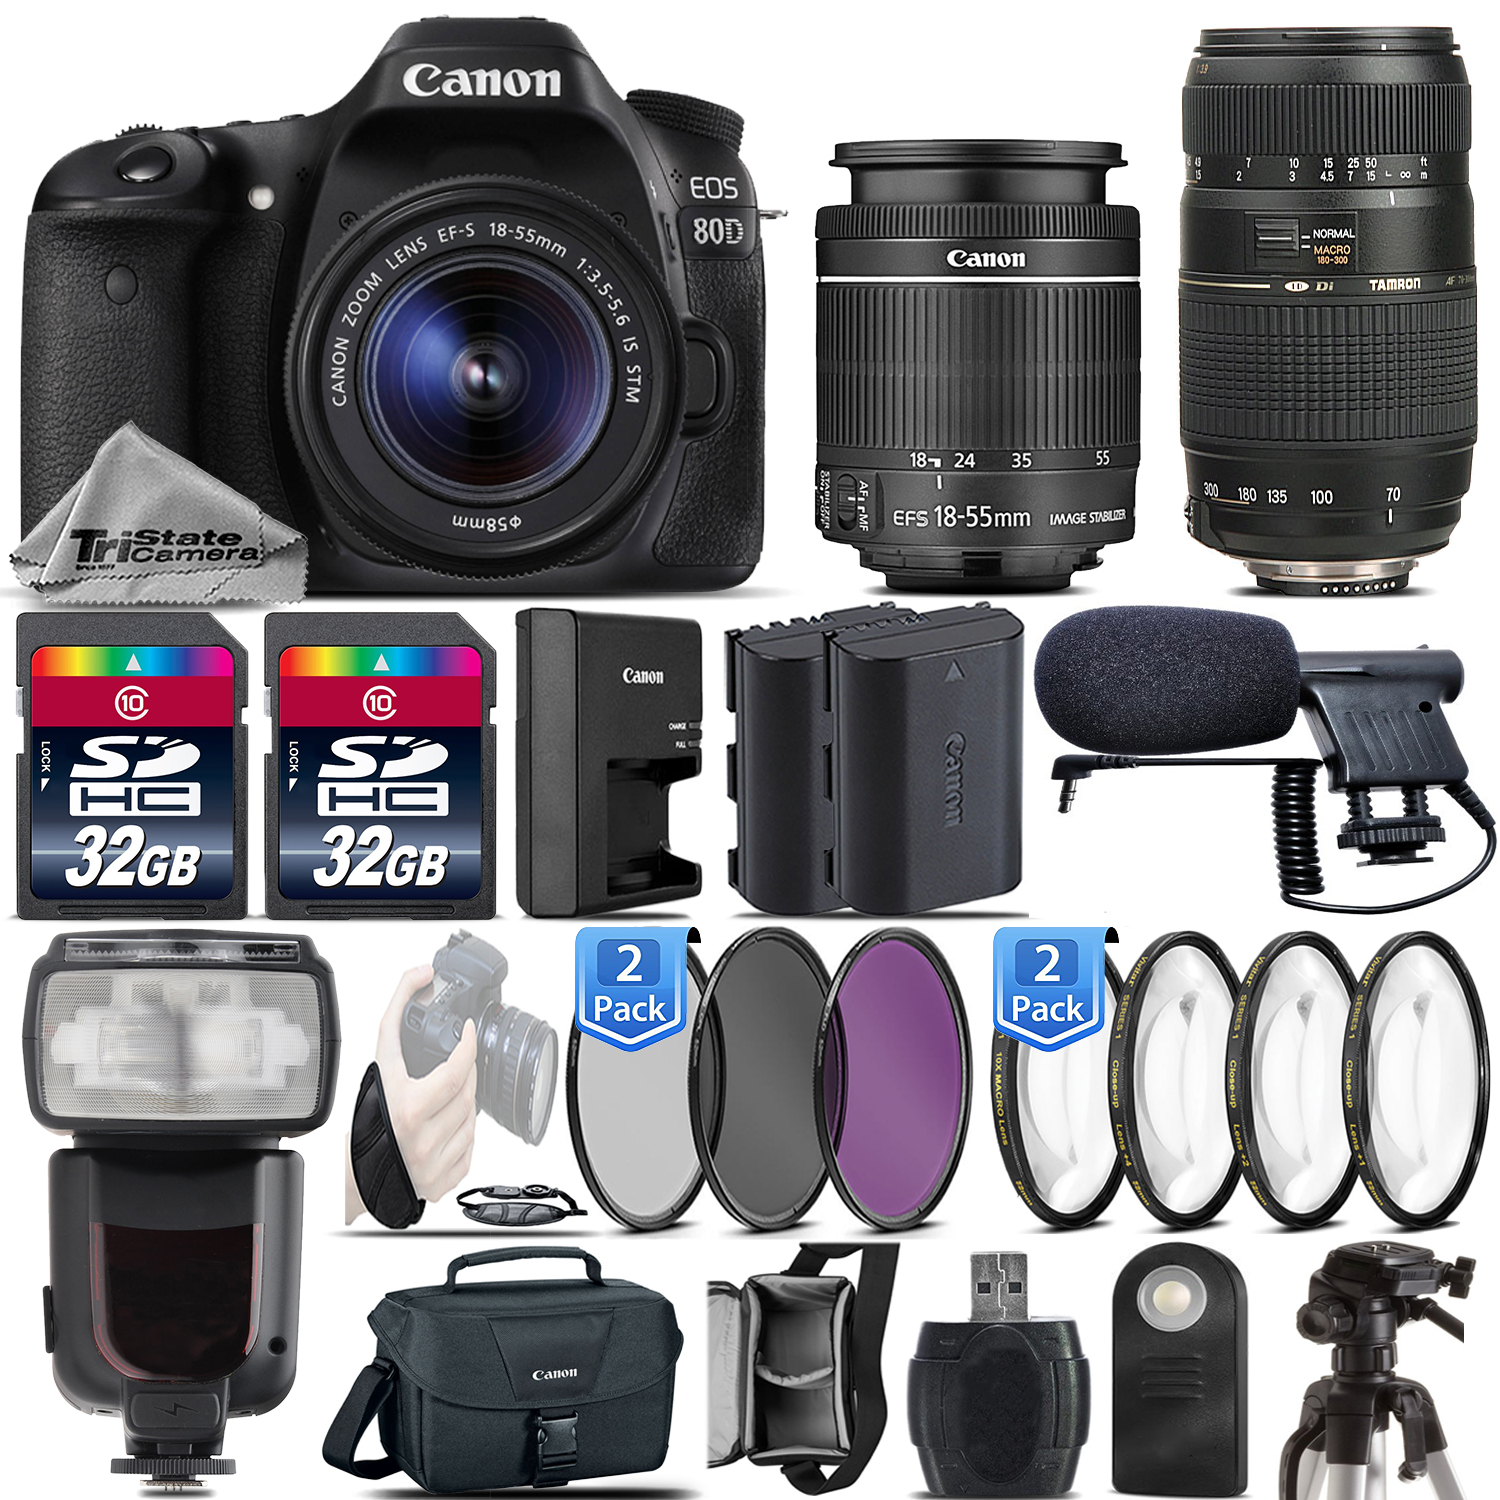 Canon 80D DSLR 24.2MP Camera WiFi NFC DIGIC 6 + 18-55mm IS STM + 70-300mm Lens *FREE SHIPPING*